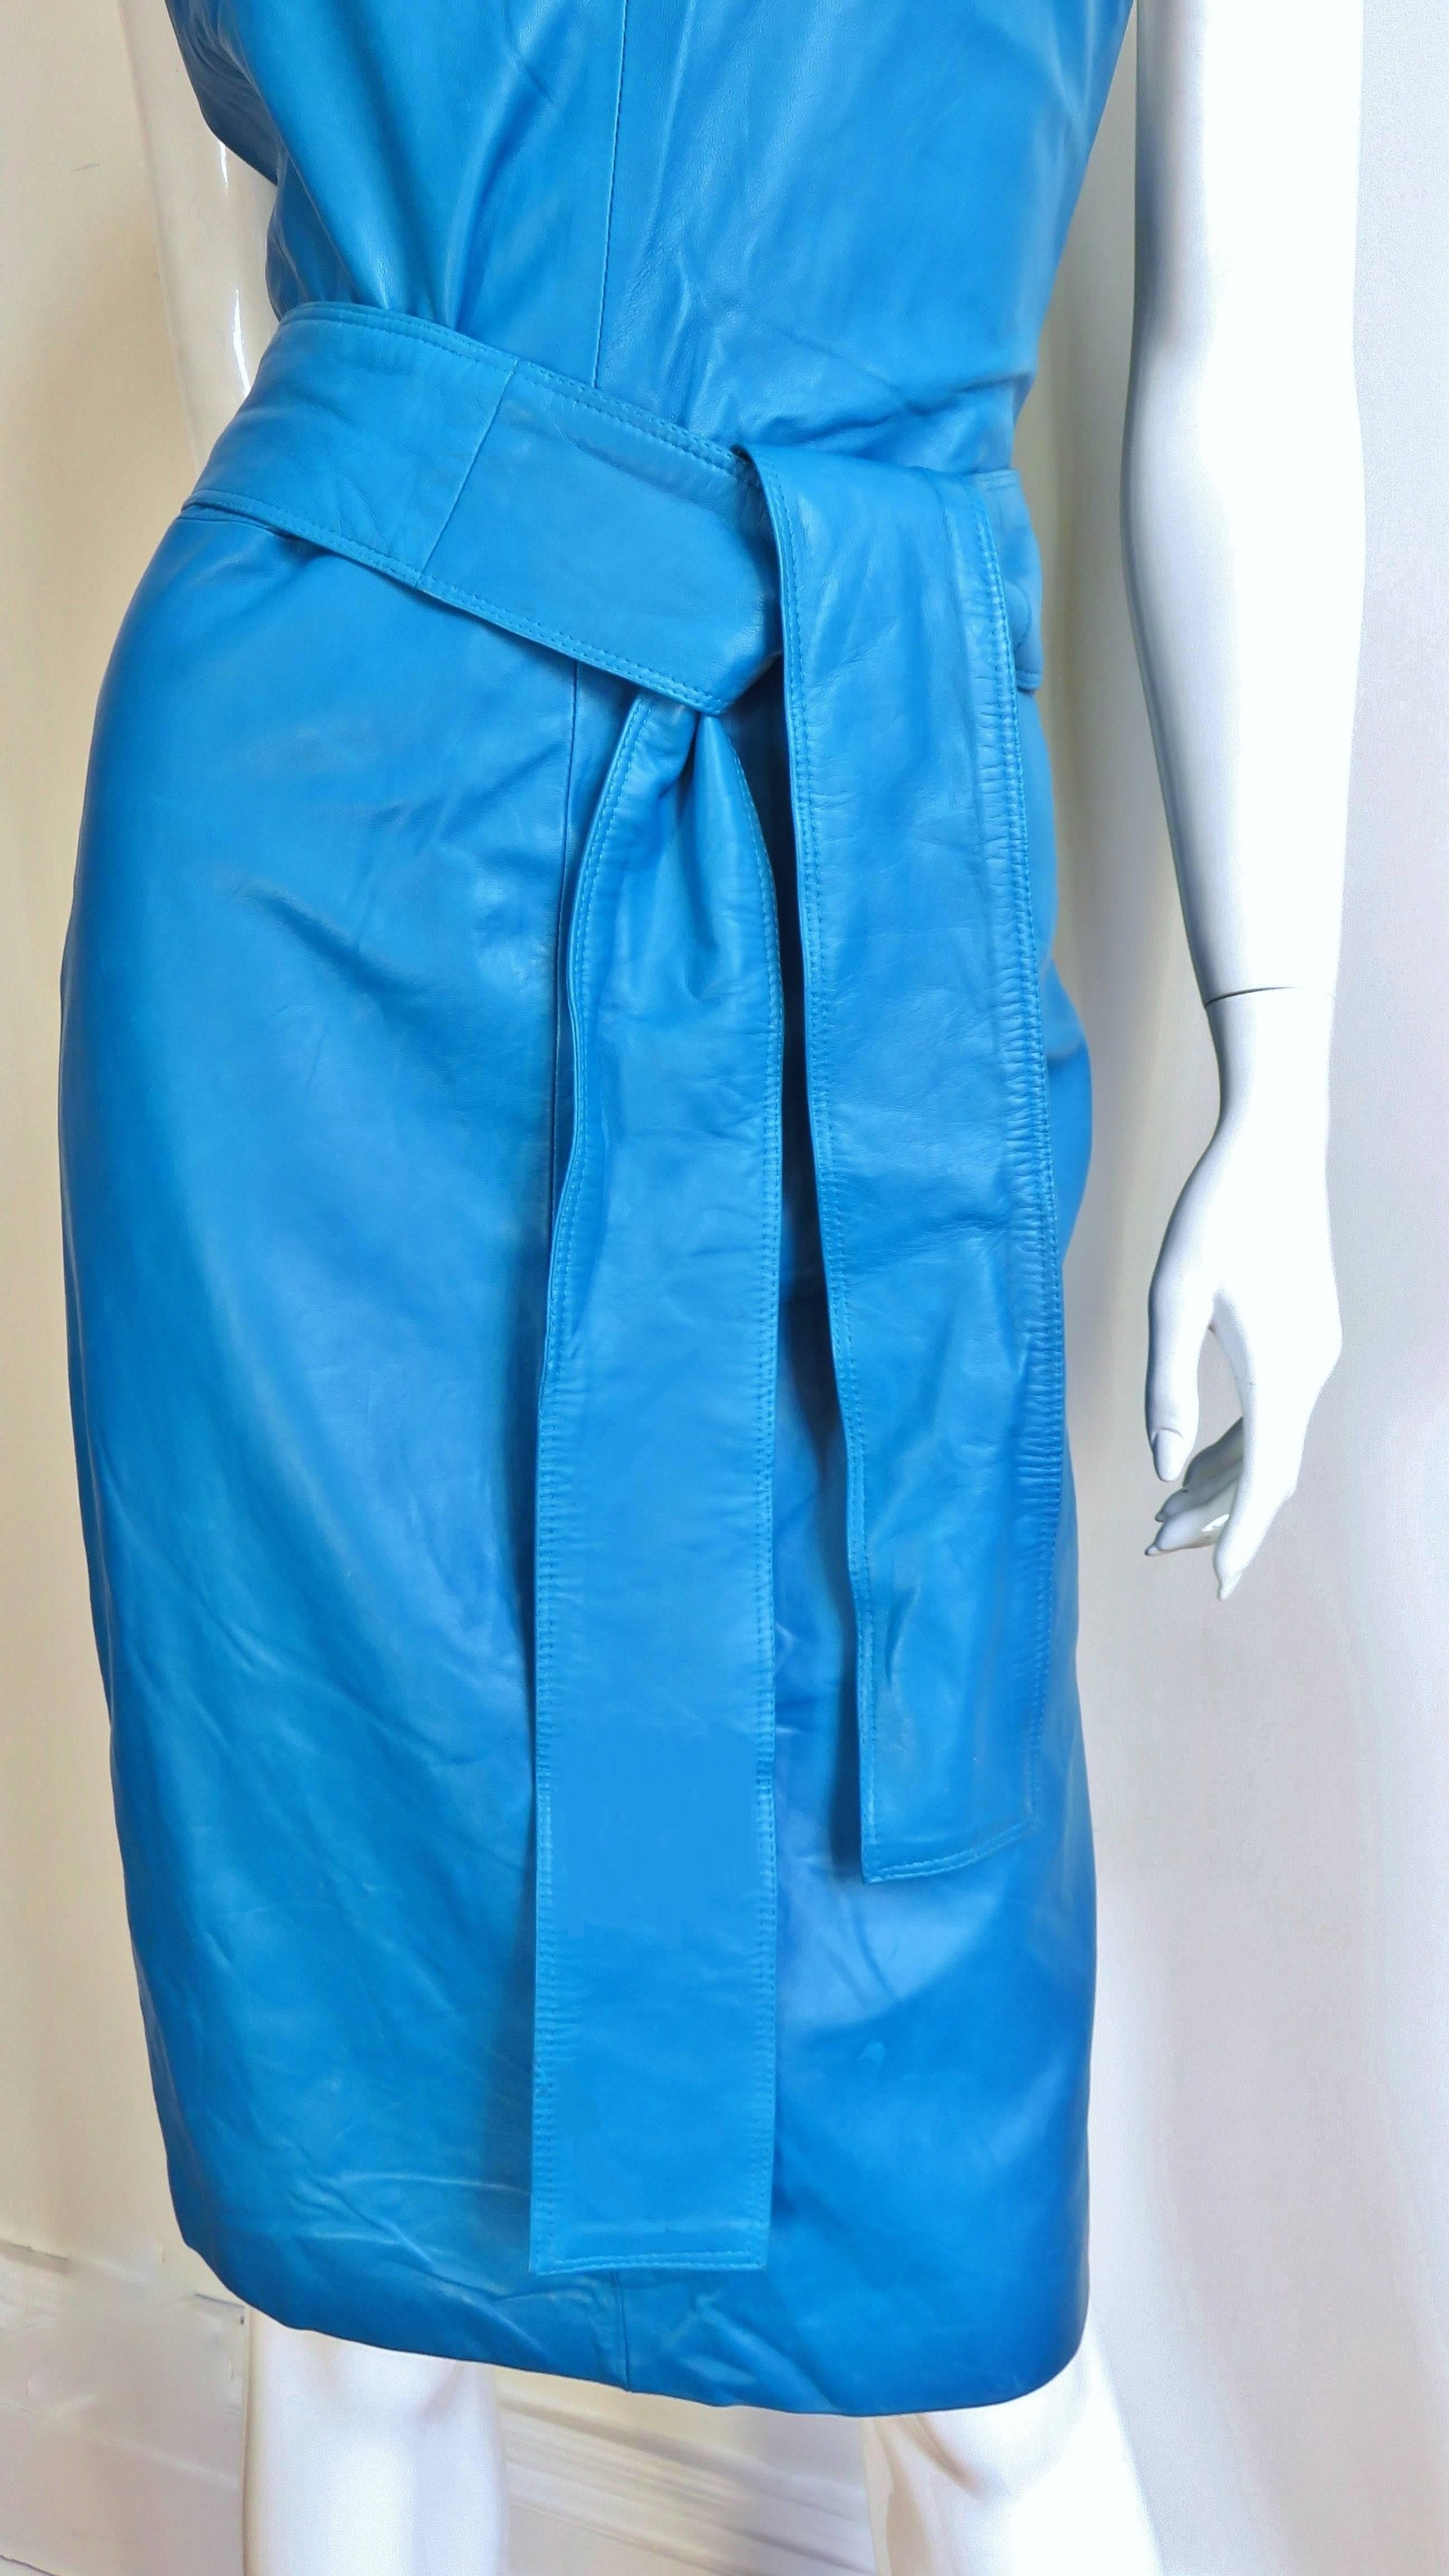 Women's  Gianni Versace New Turquoise Leather Dress 1990s For Sale